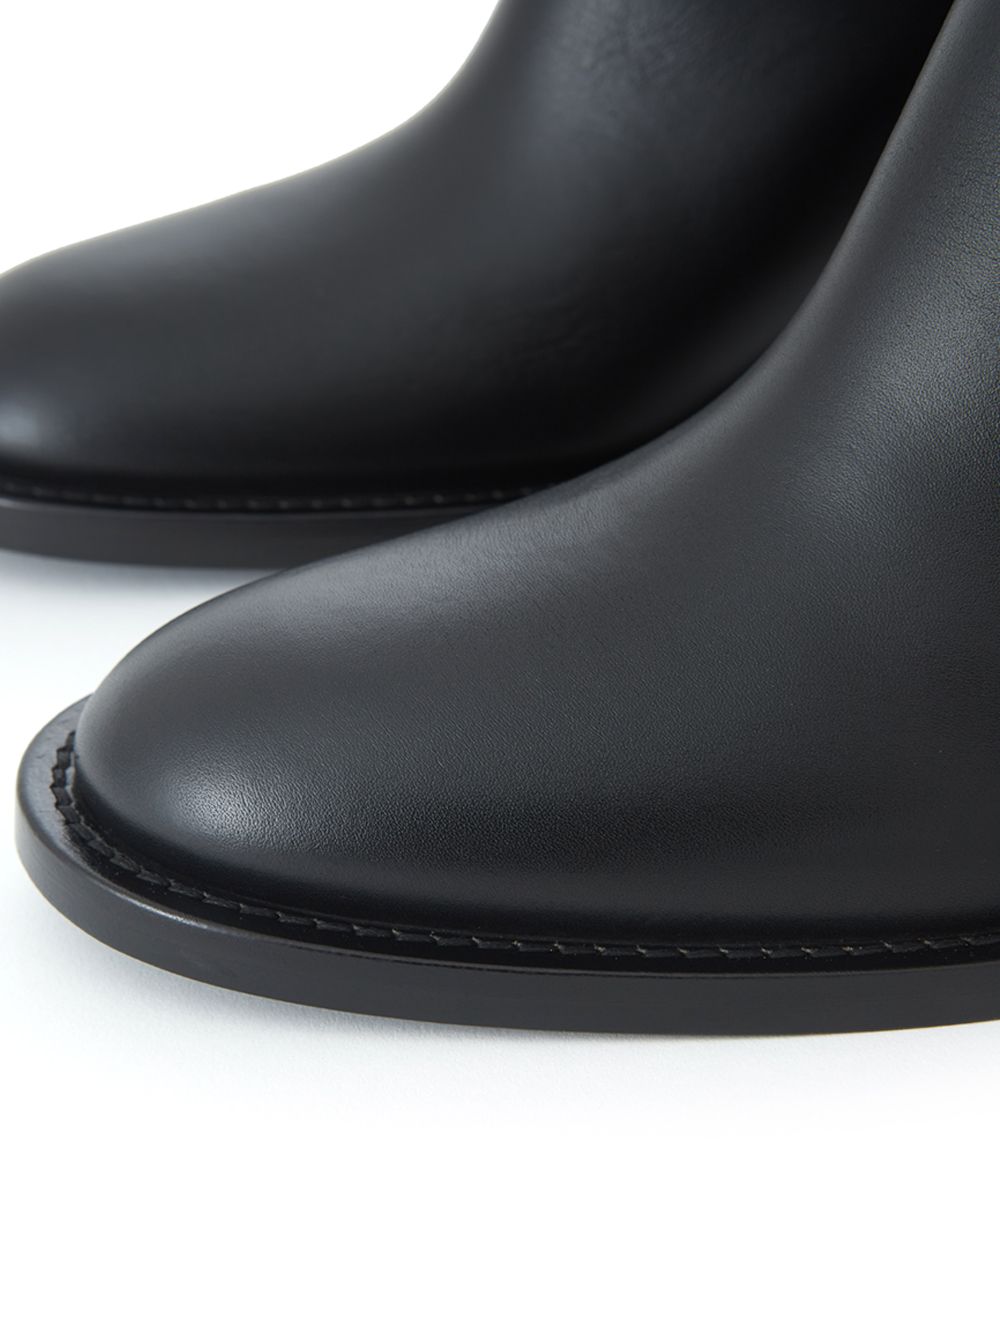 Burberry Black Leather Ankle Boots